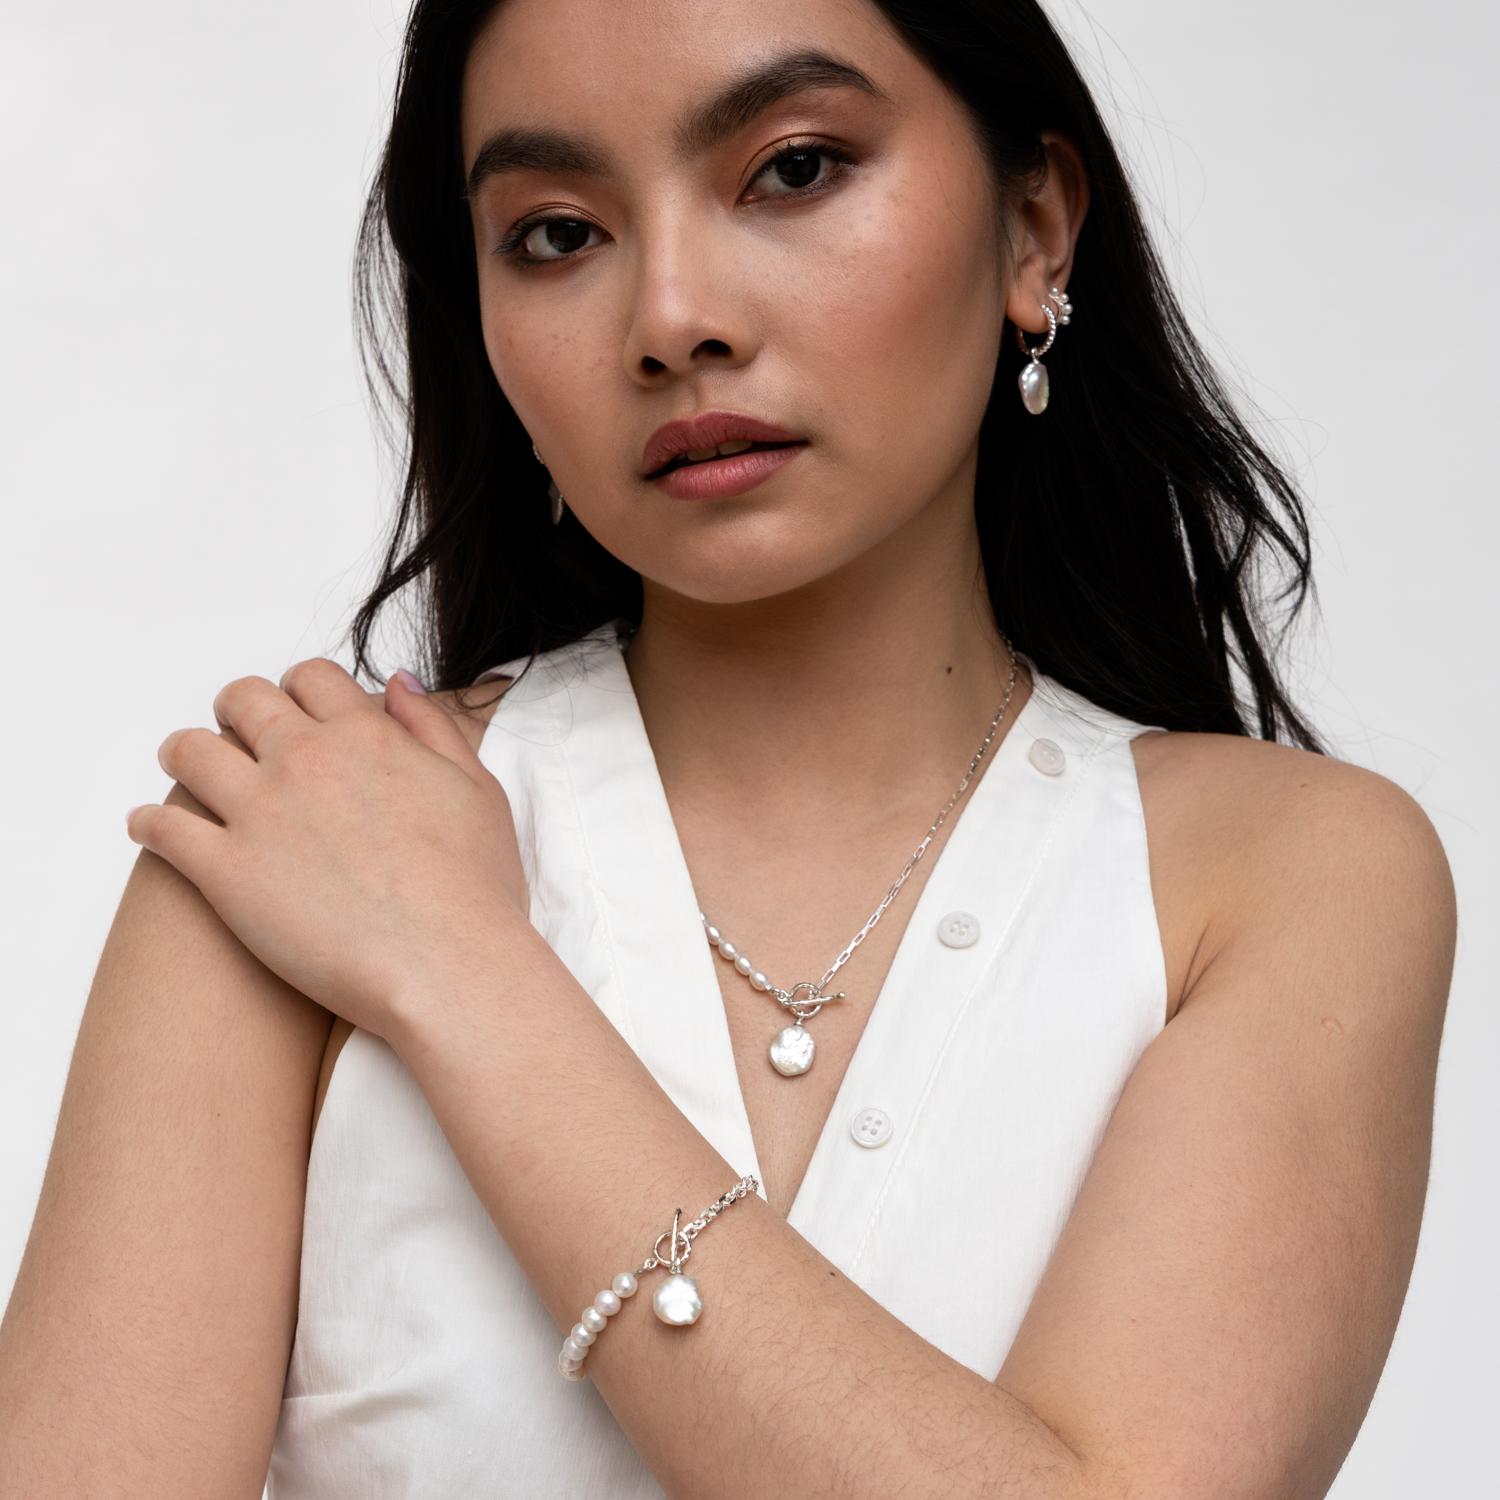 A playful modern take on a classic Dower & Hall design, this eclectic Luna Pearls bracelet combines 6mm round freshwater pearls and sterling silver rectangular link chain to dramatic effect. Accented with a 12 x 10mm keshi pearl drop, it fastens